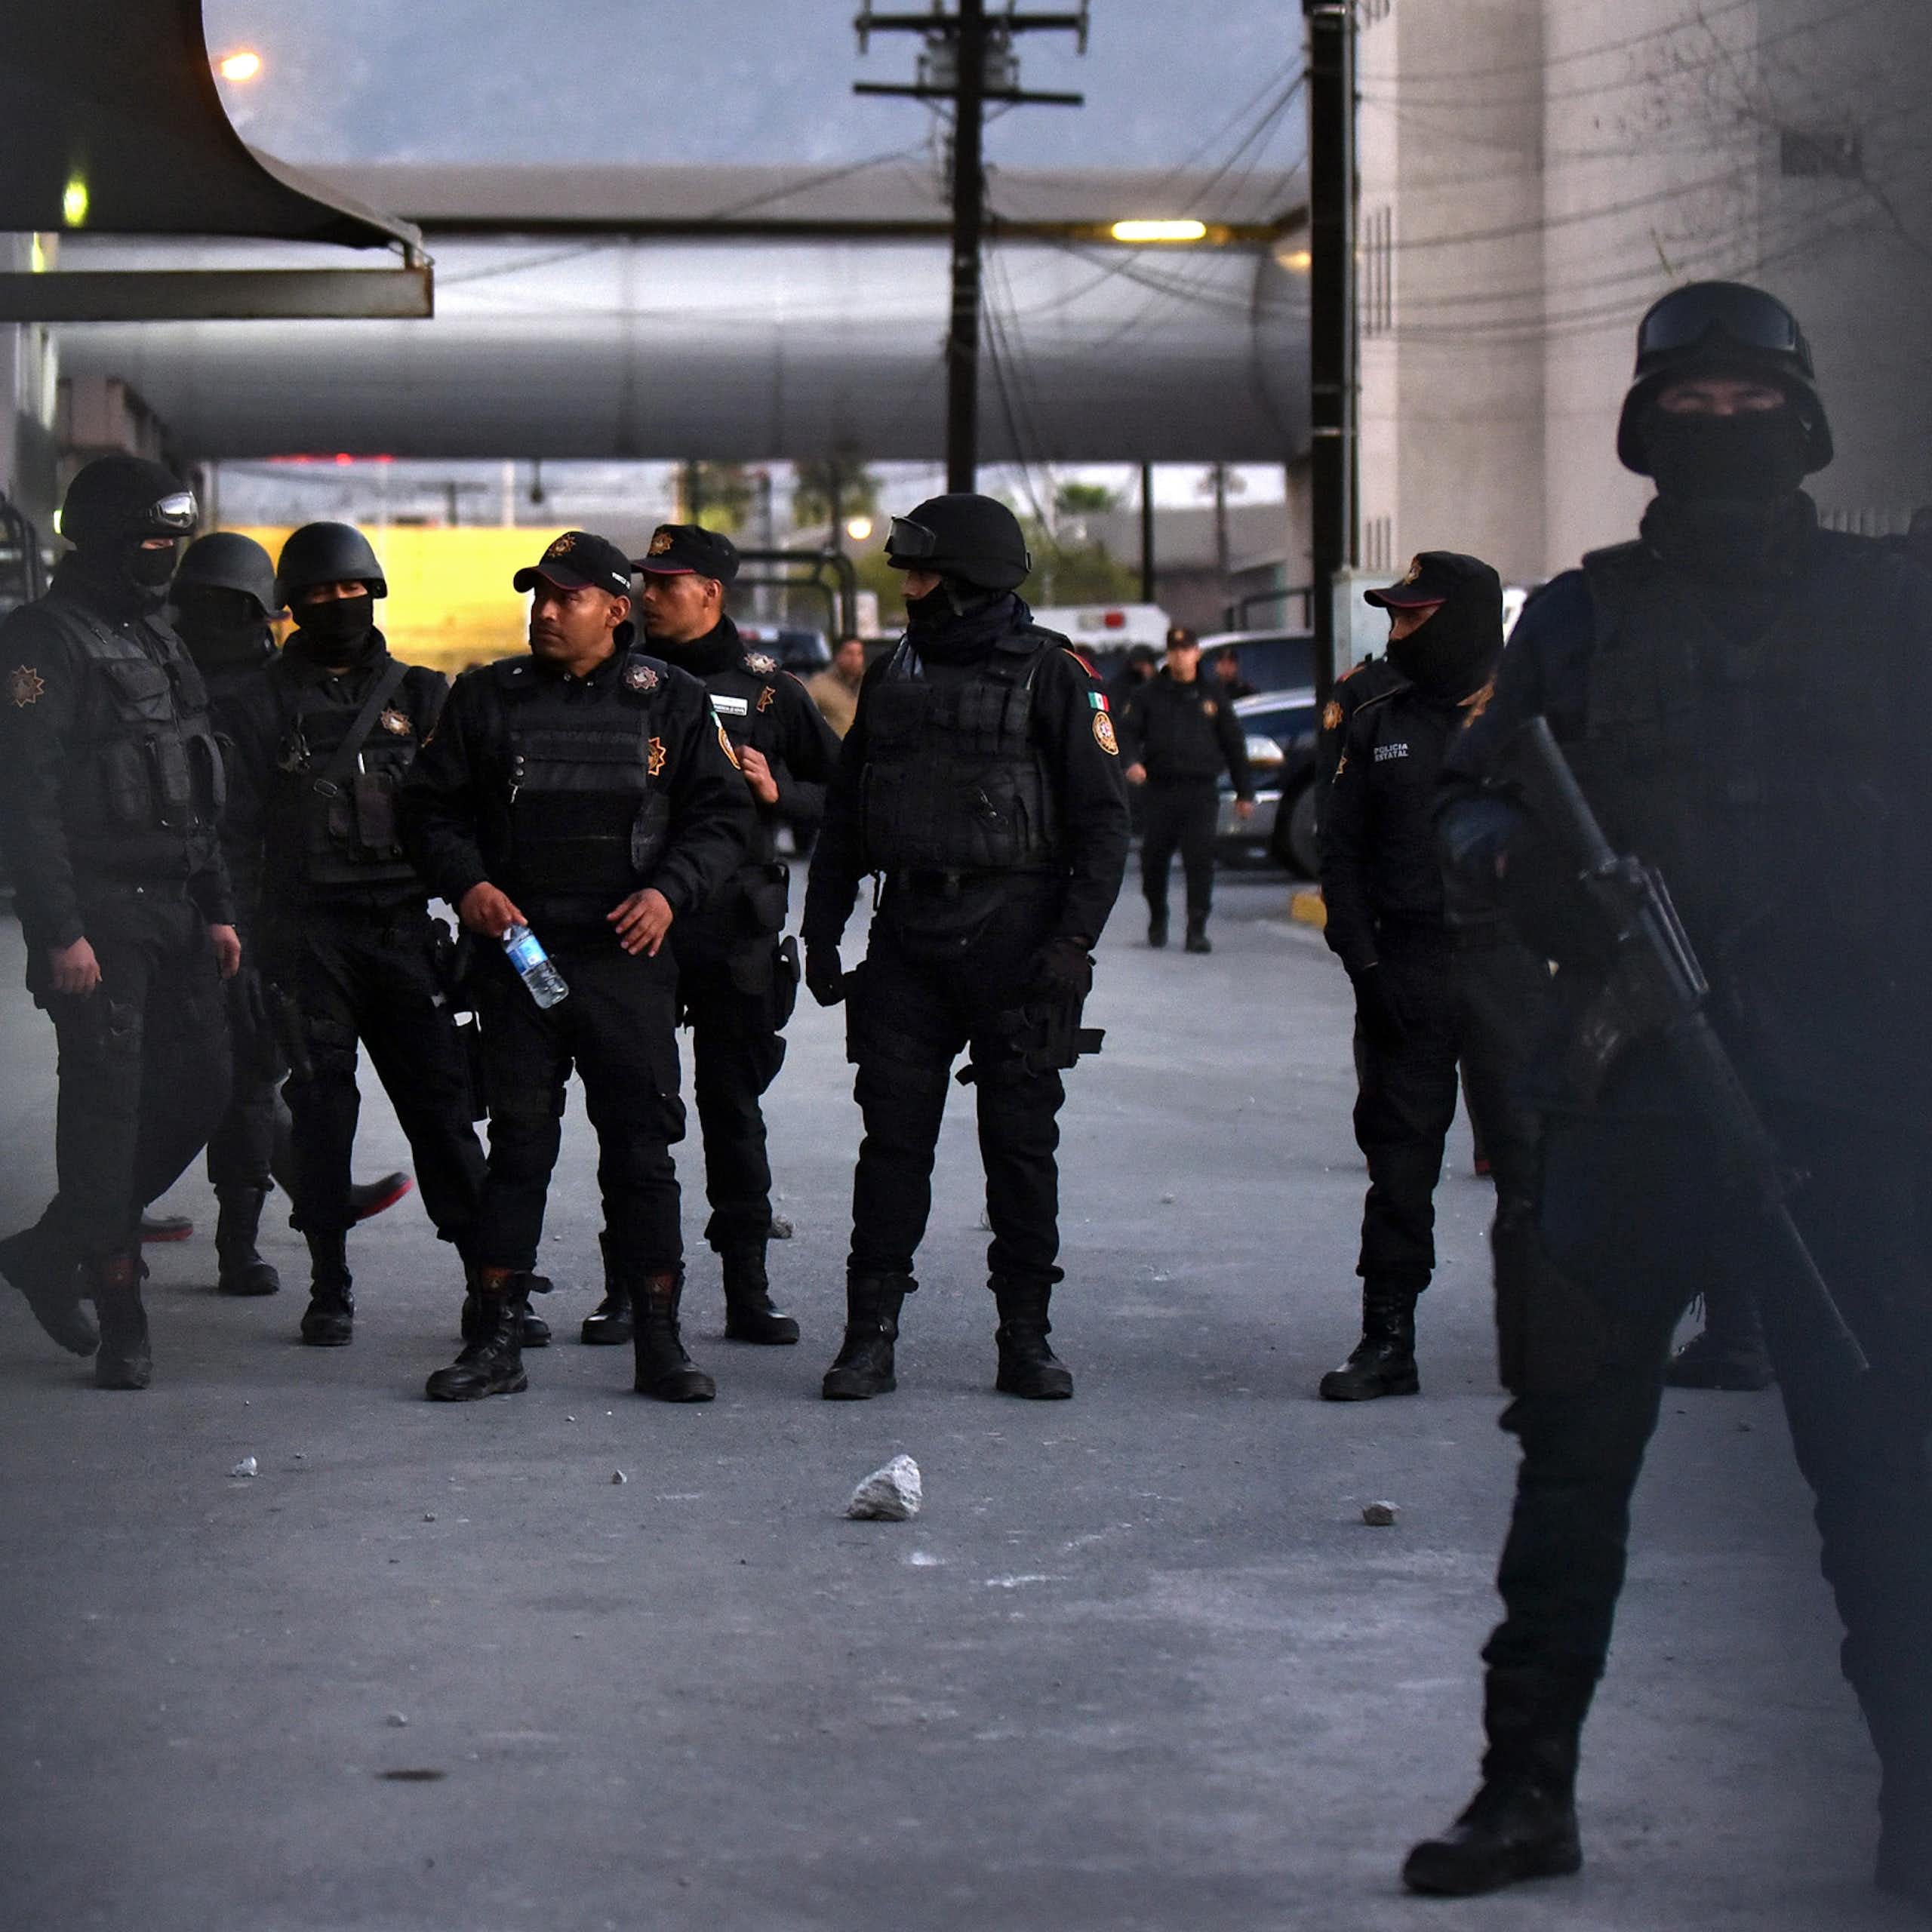 Armed Mexican policemen standing in a group in a car park.